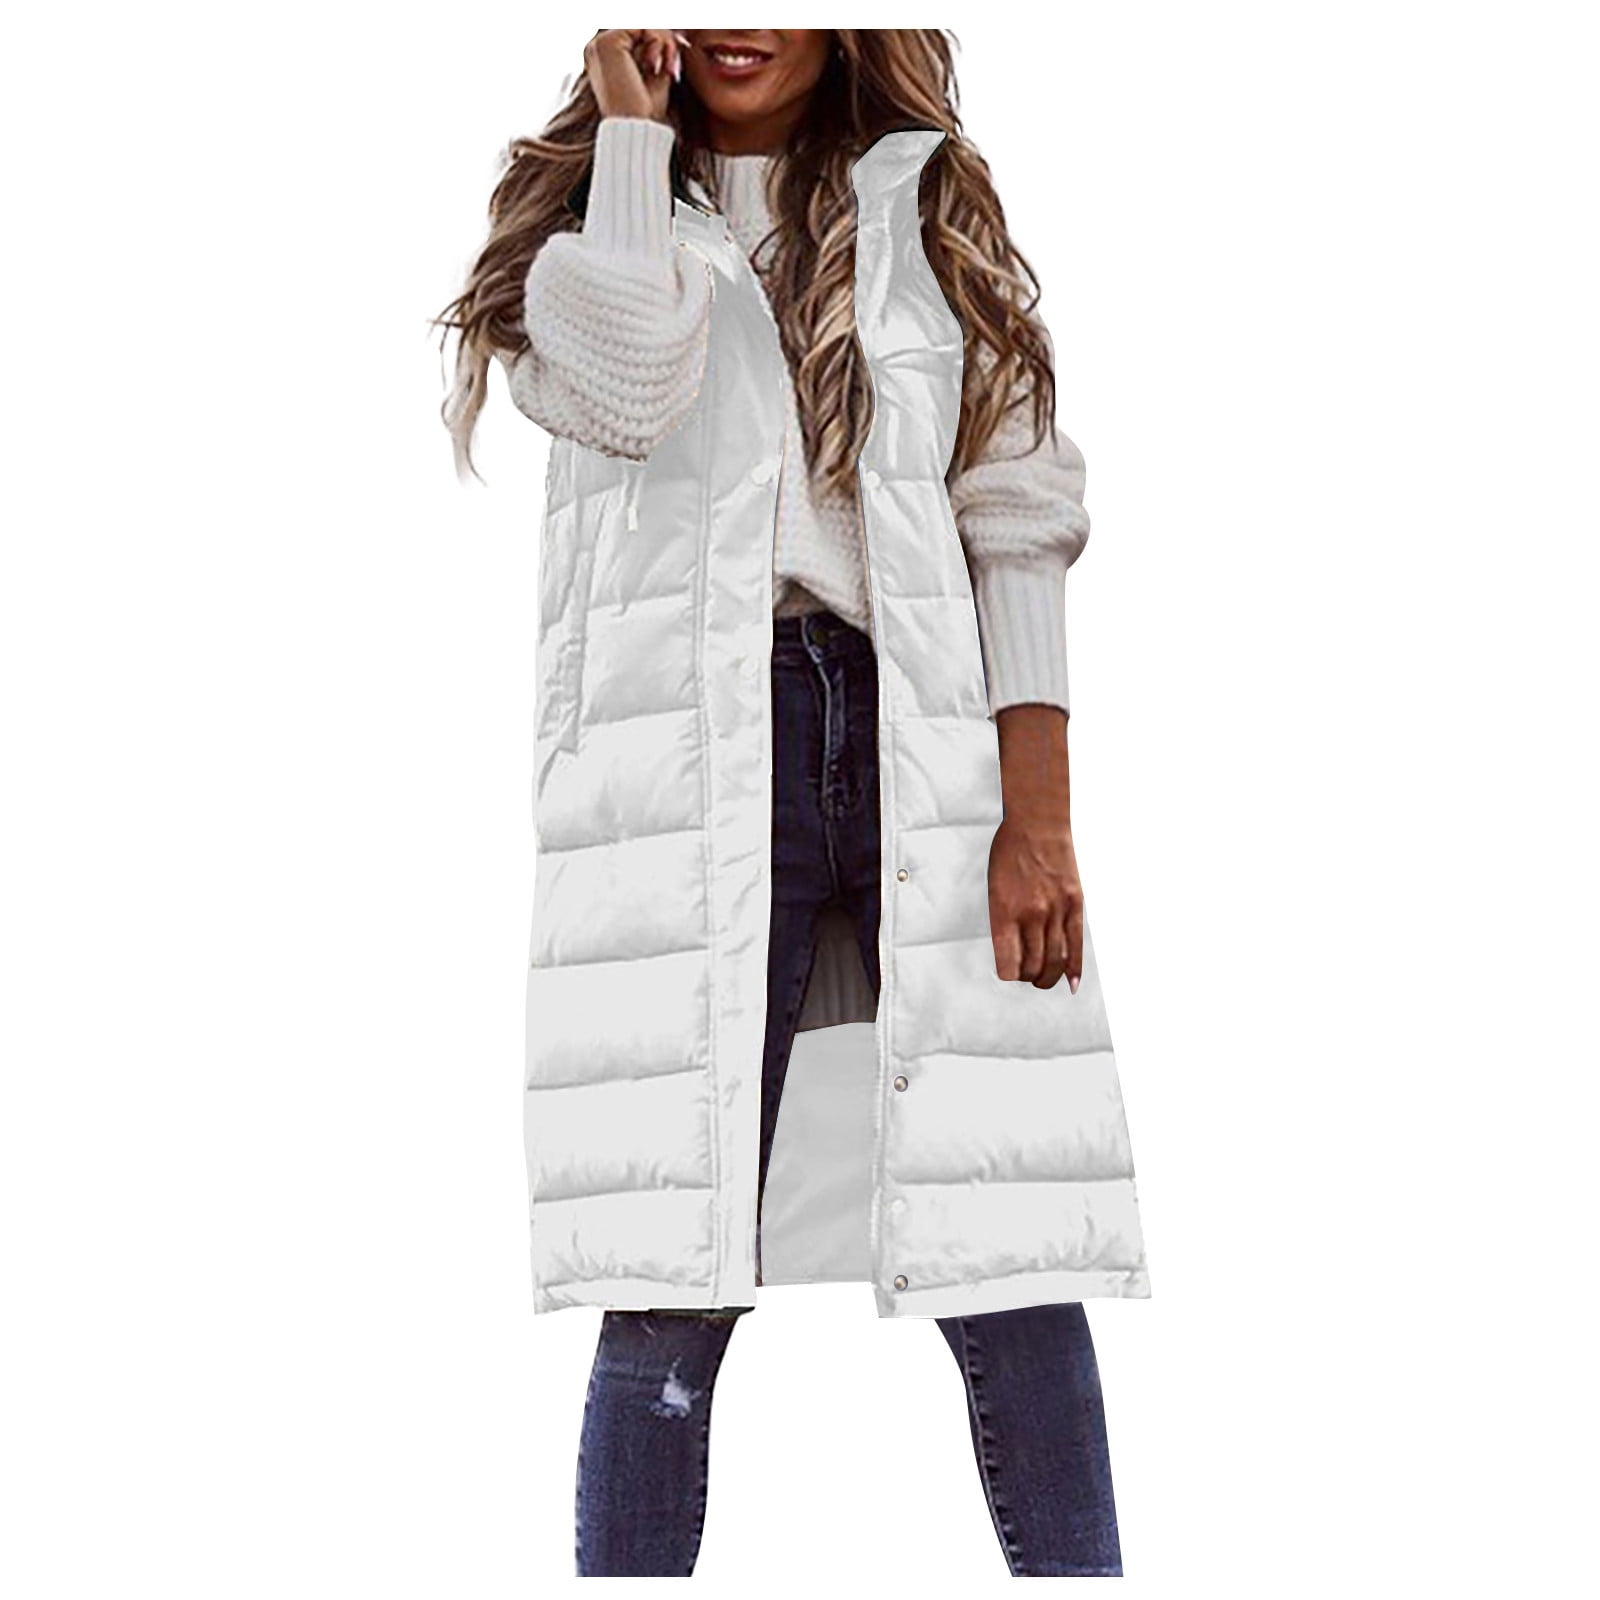 TQWQT Women's Long Quilted Vest Hooded Maxi Length Sleeveless Puffer ...